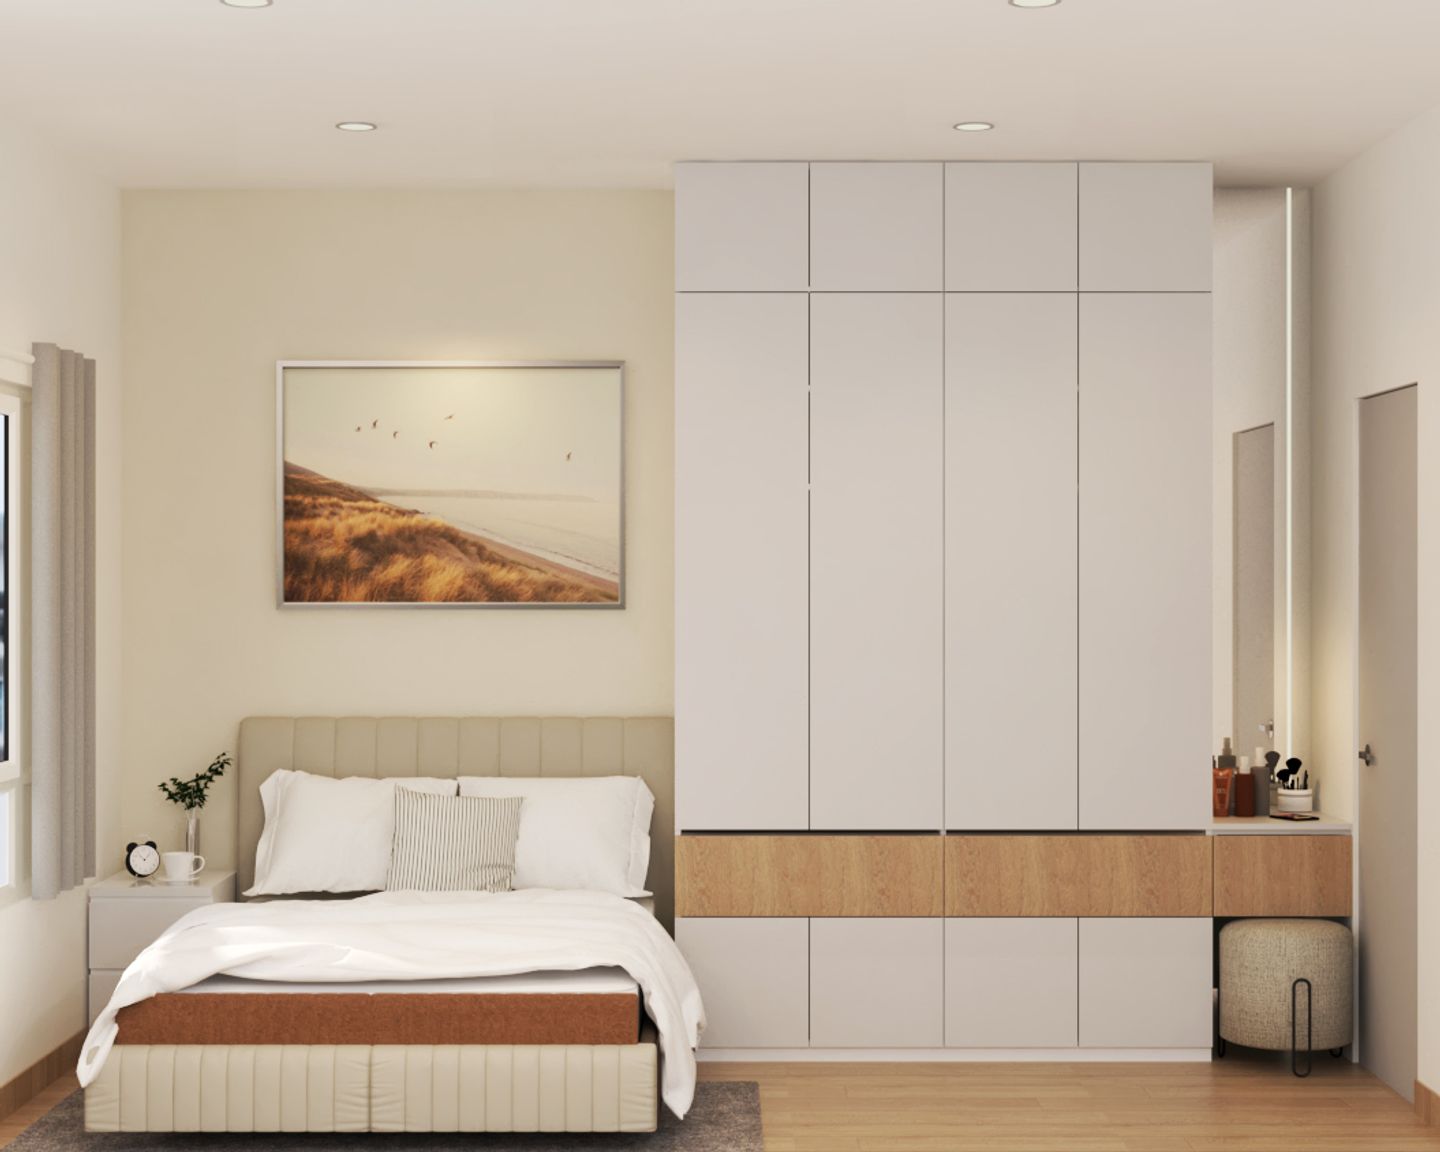 Master Bedroom Design With A Double Bed And A Spacious White Wardrobe - Livspace